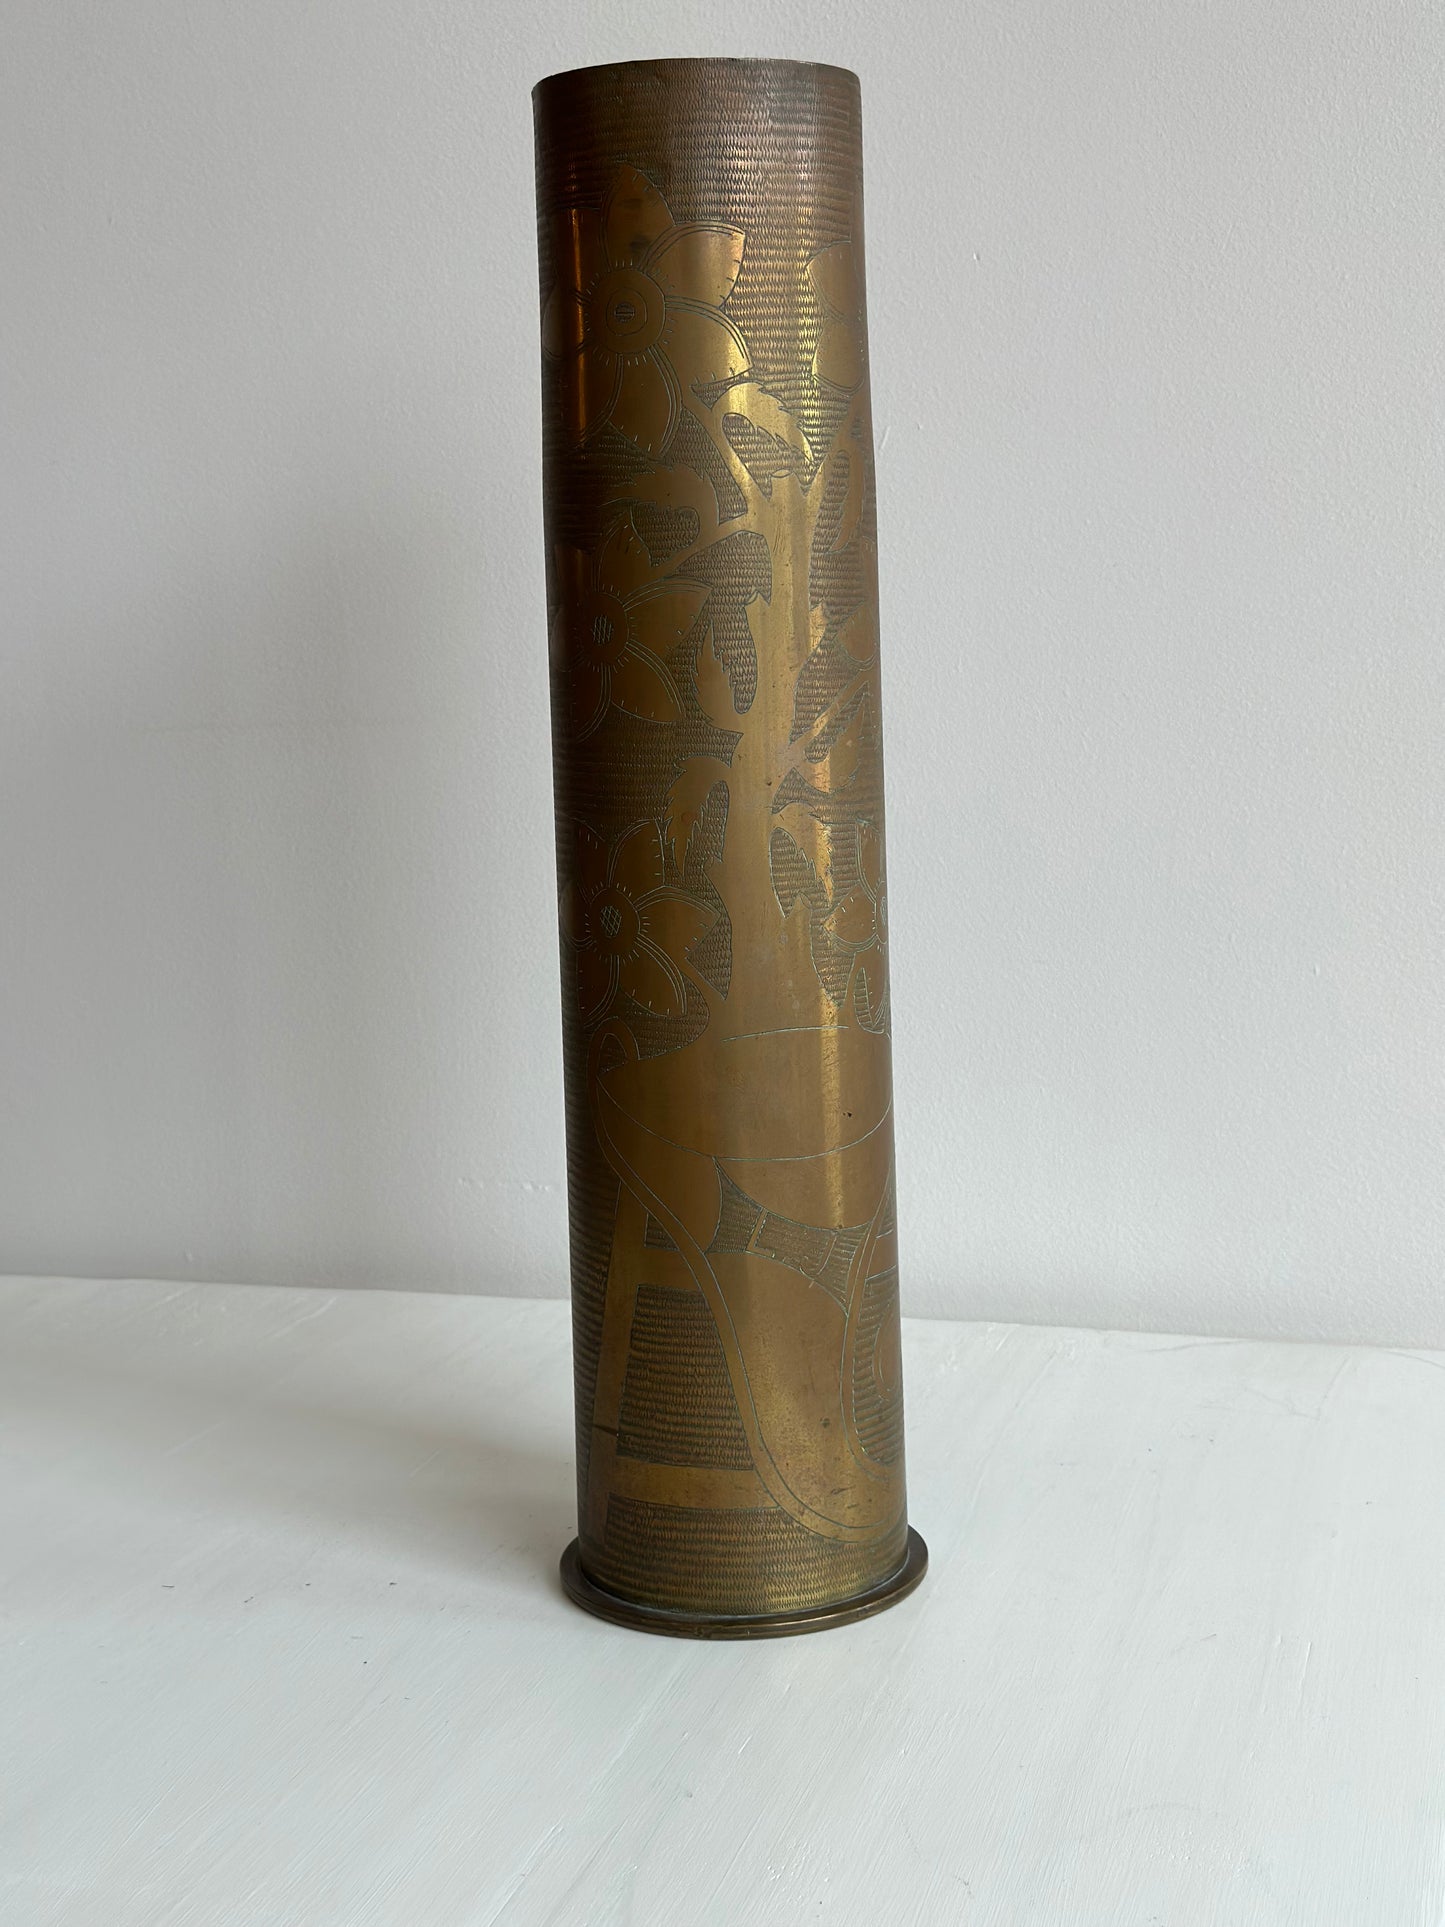 Trench Art - Large